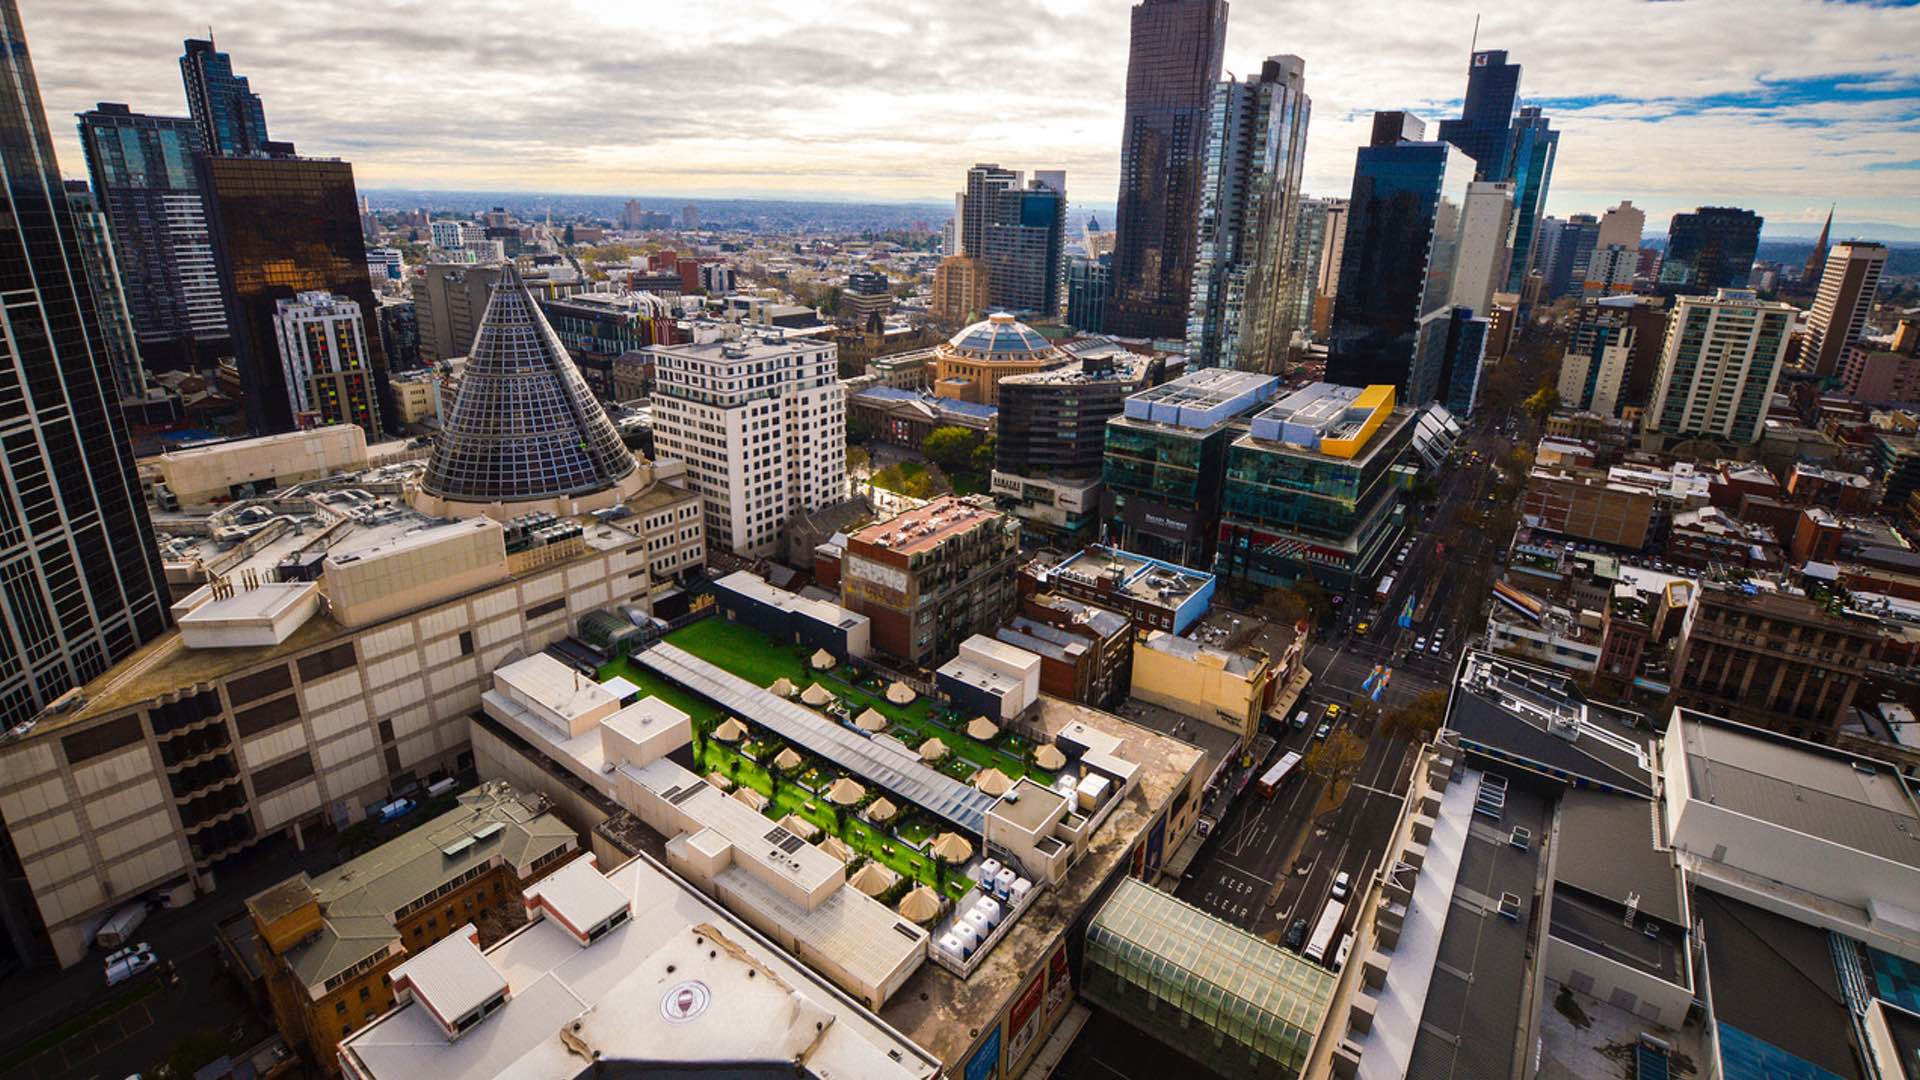 Melbourne Central's New Rooftop Pool Club and Bar Will Open Next Week